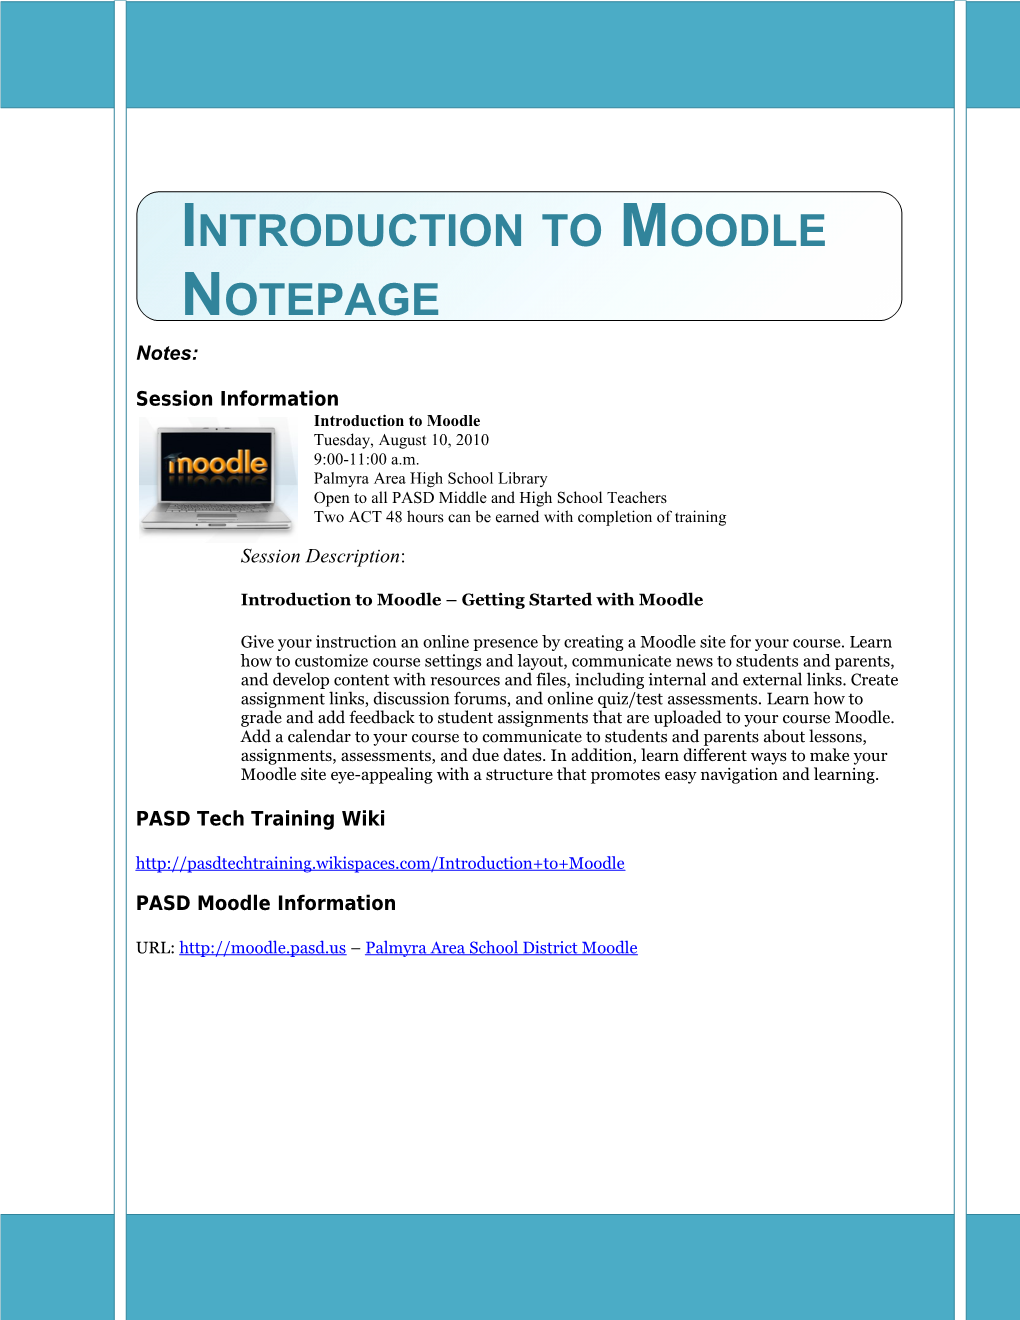 Introduction to Moodle Notepage